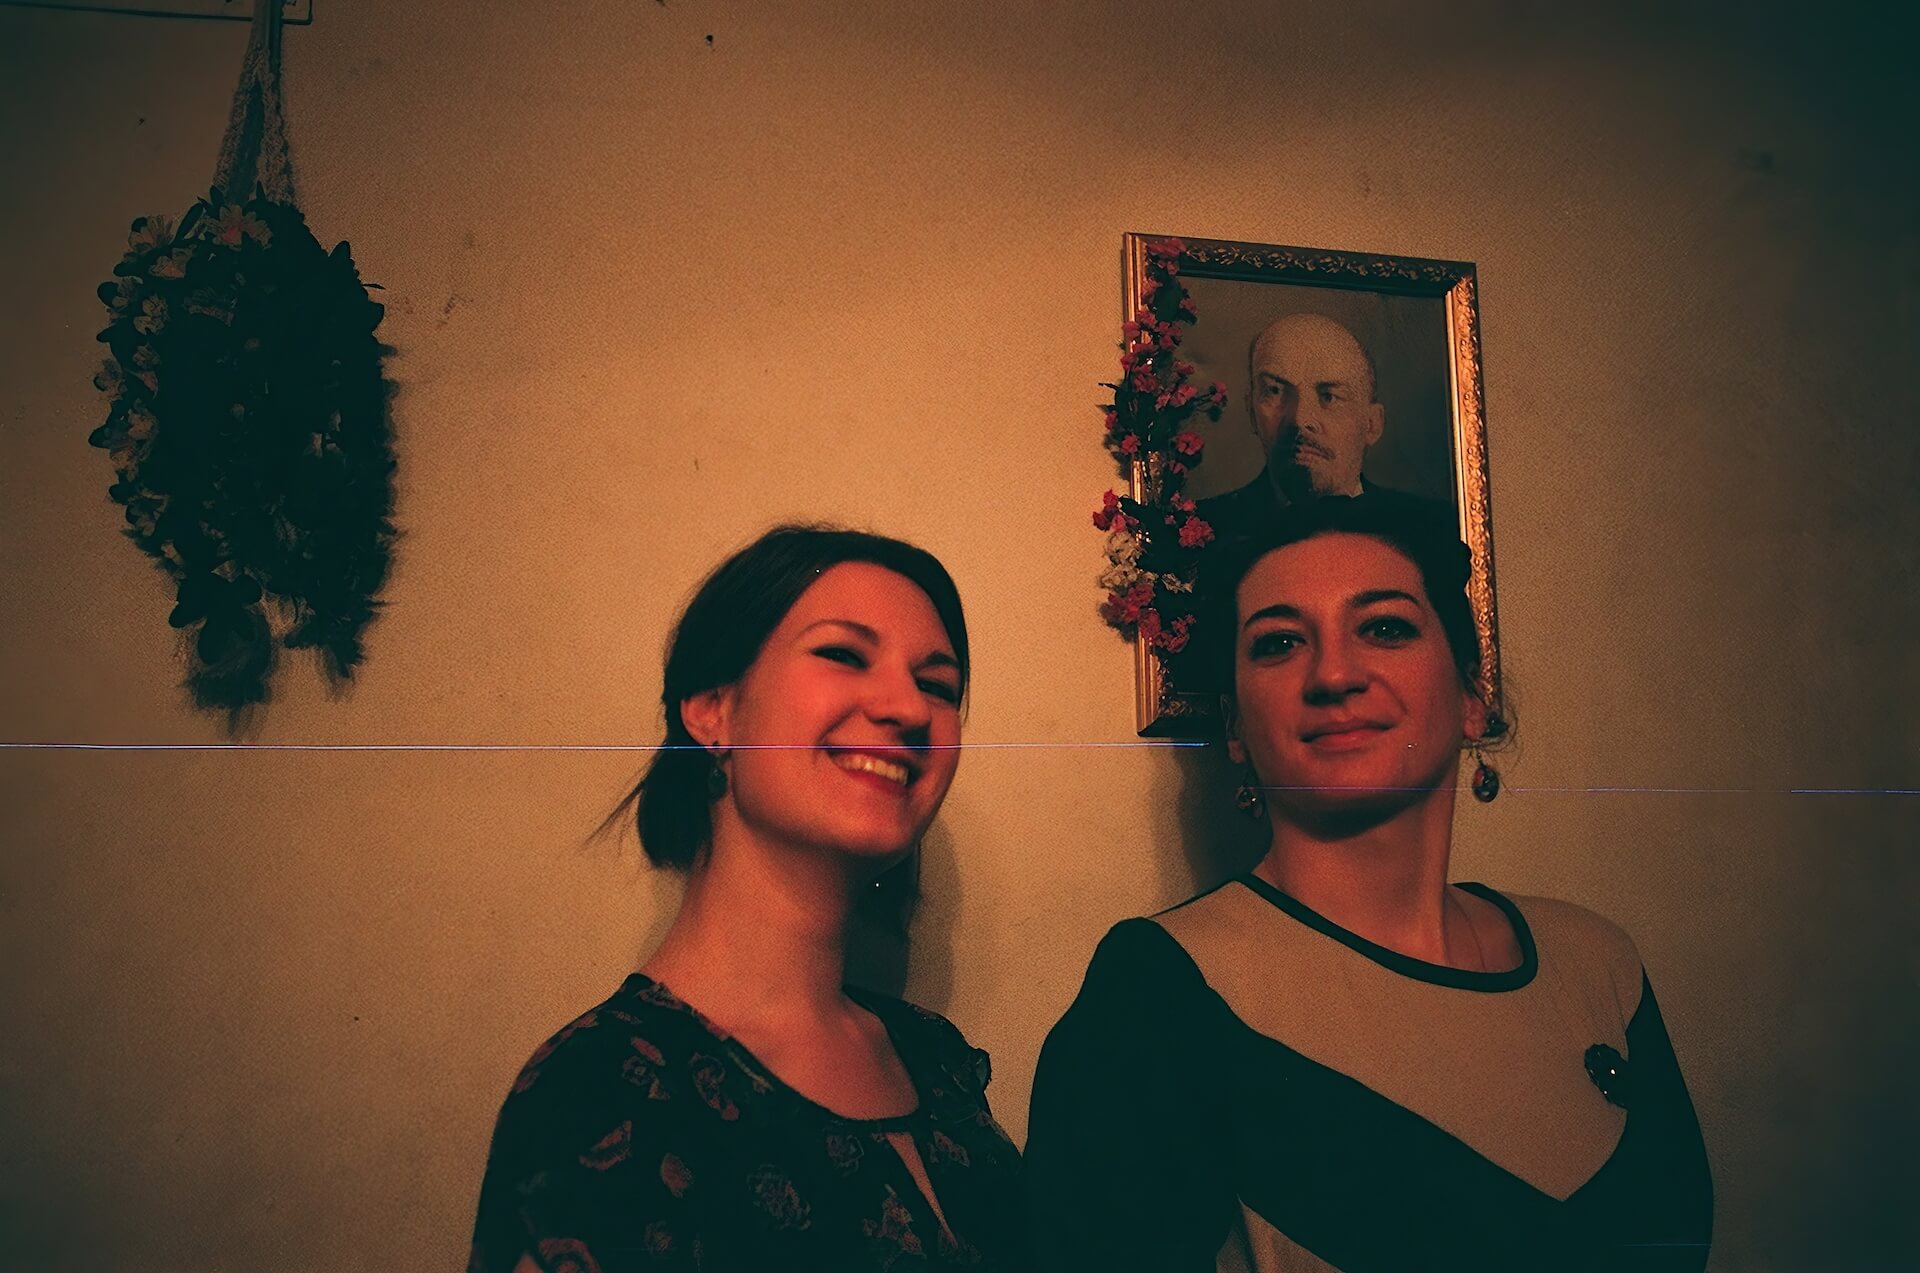 Two people posing for photo in front of a portrait decorated with flowers